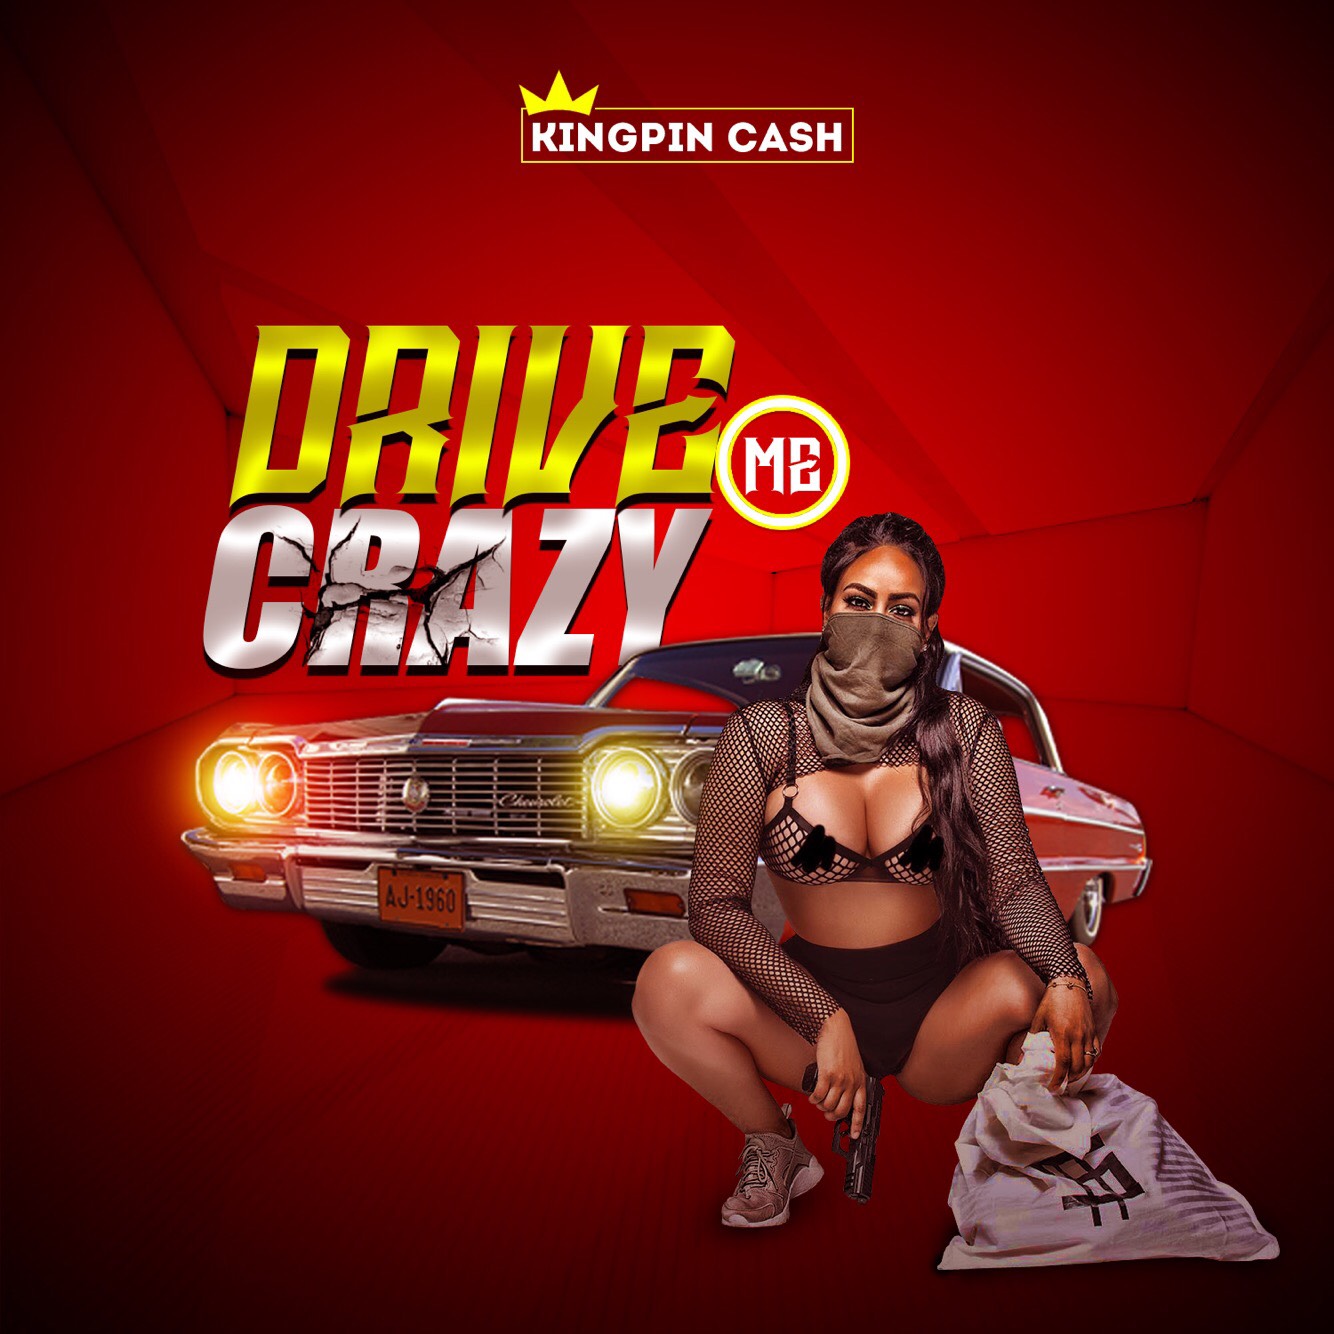 When it’s you and a lady late night, the freak in her may “Drive you Crazy” @Kingpincash